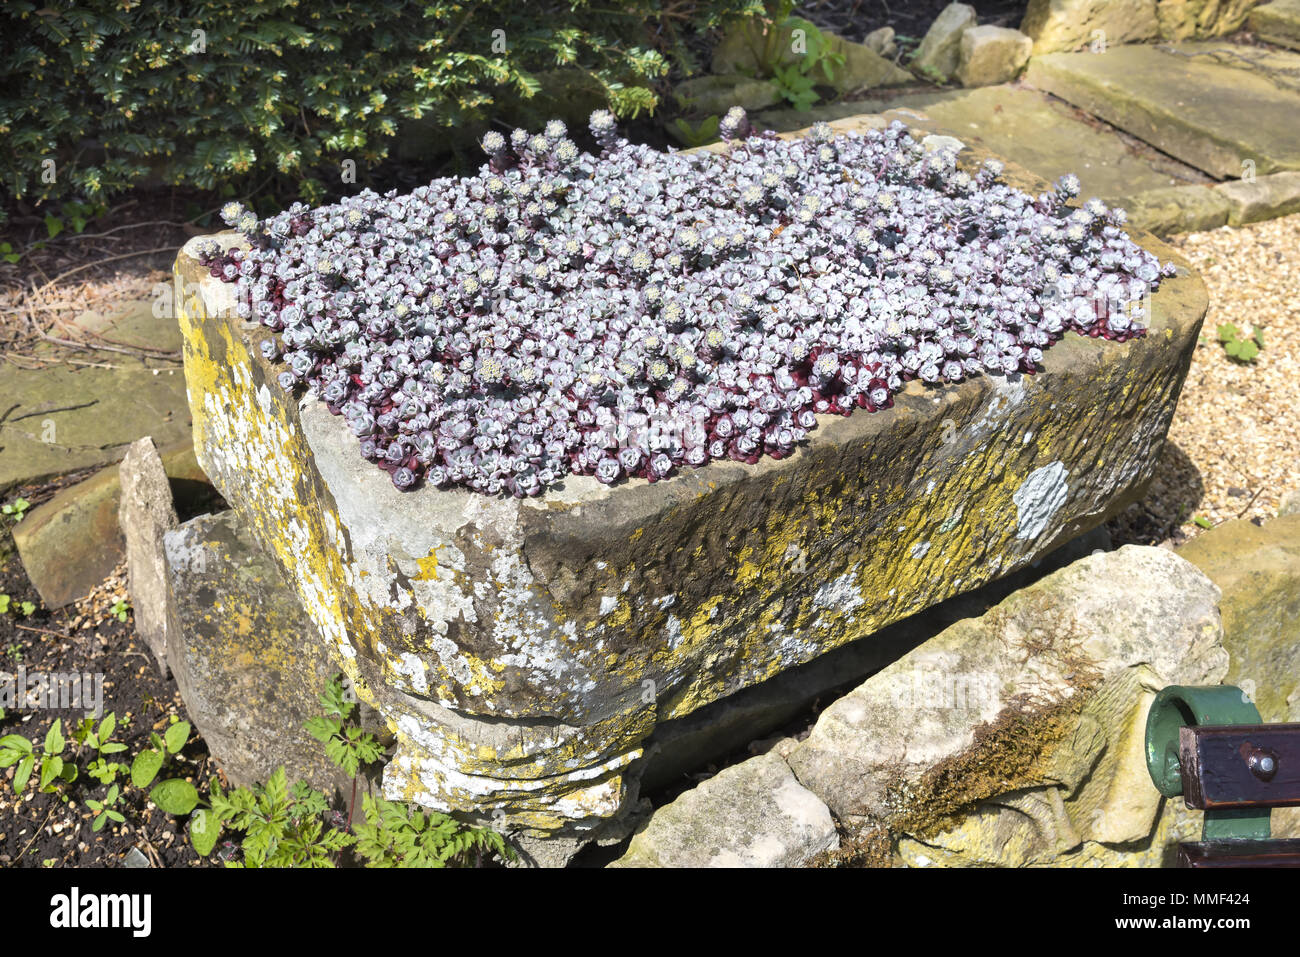 Small stone trough container full of purple flowering saxifrage alpine plants. Stock Photo